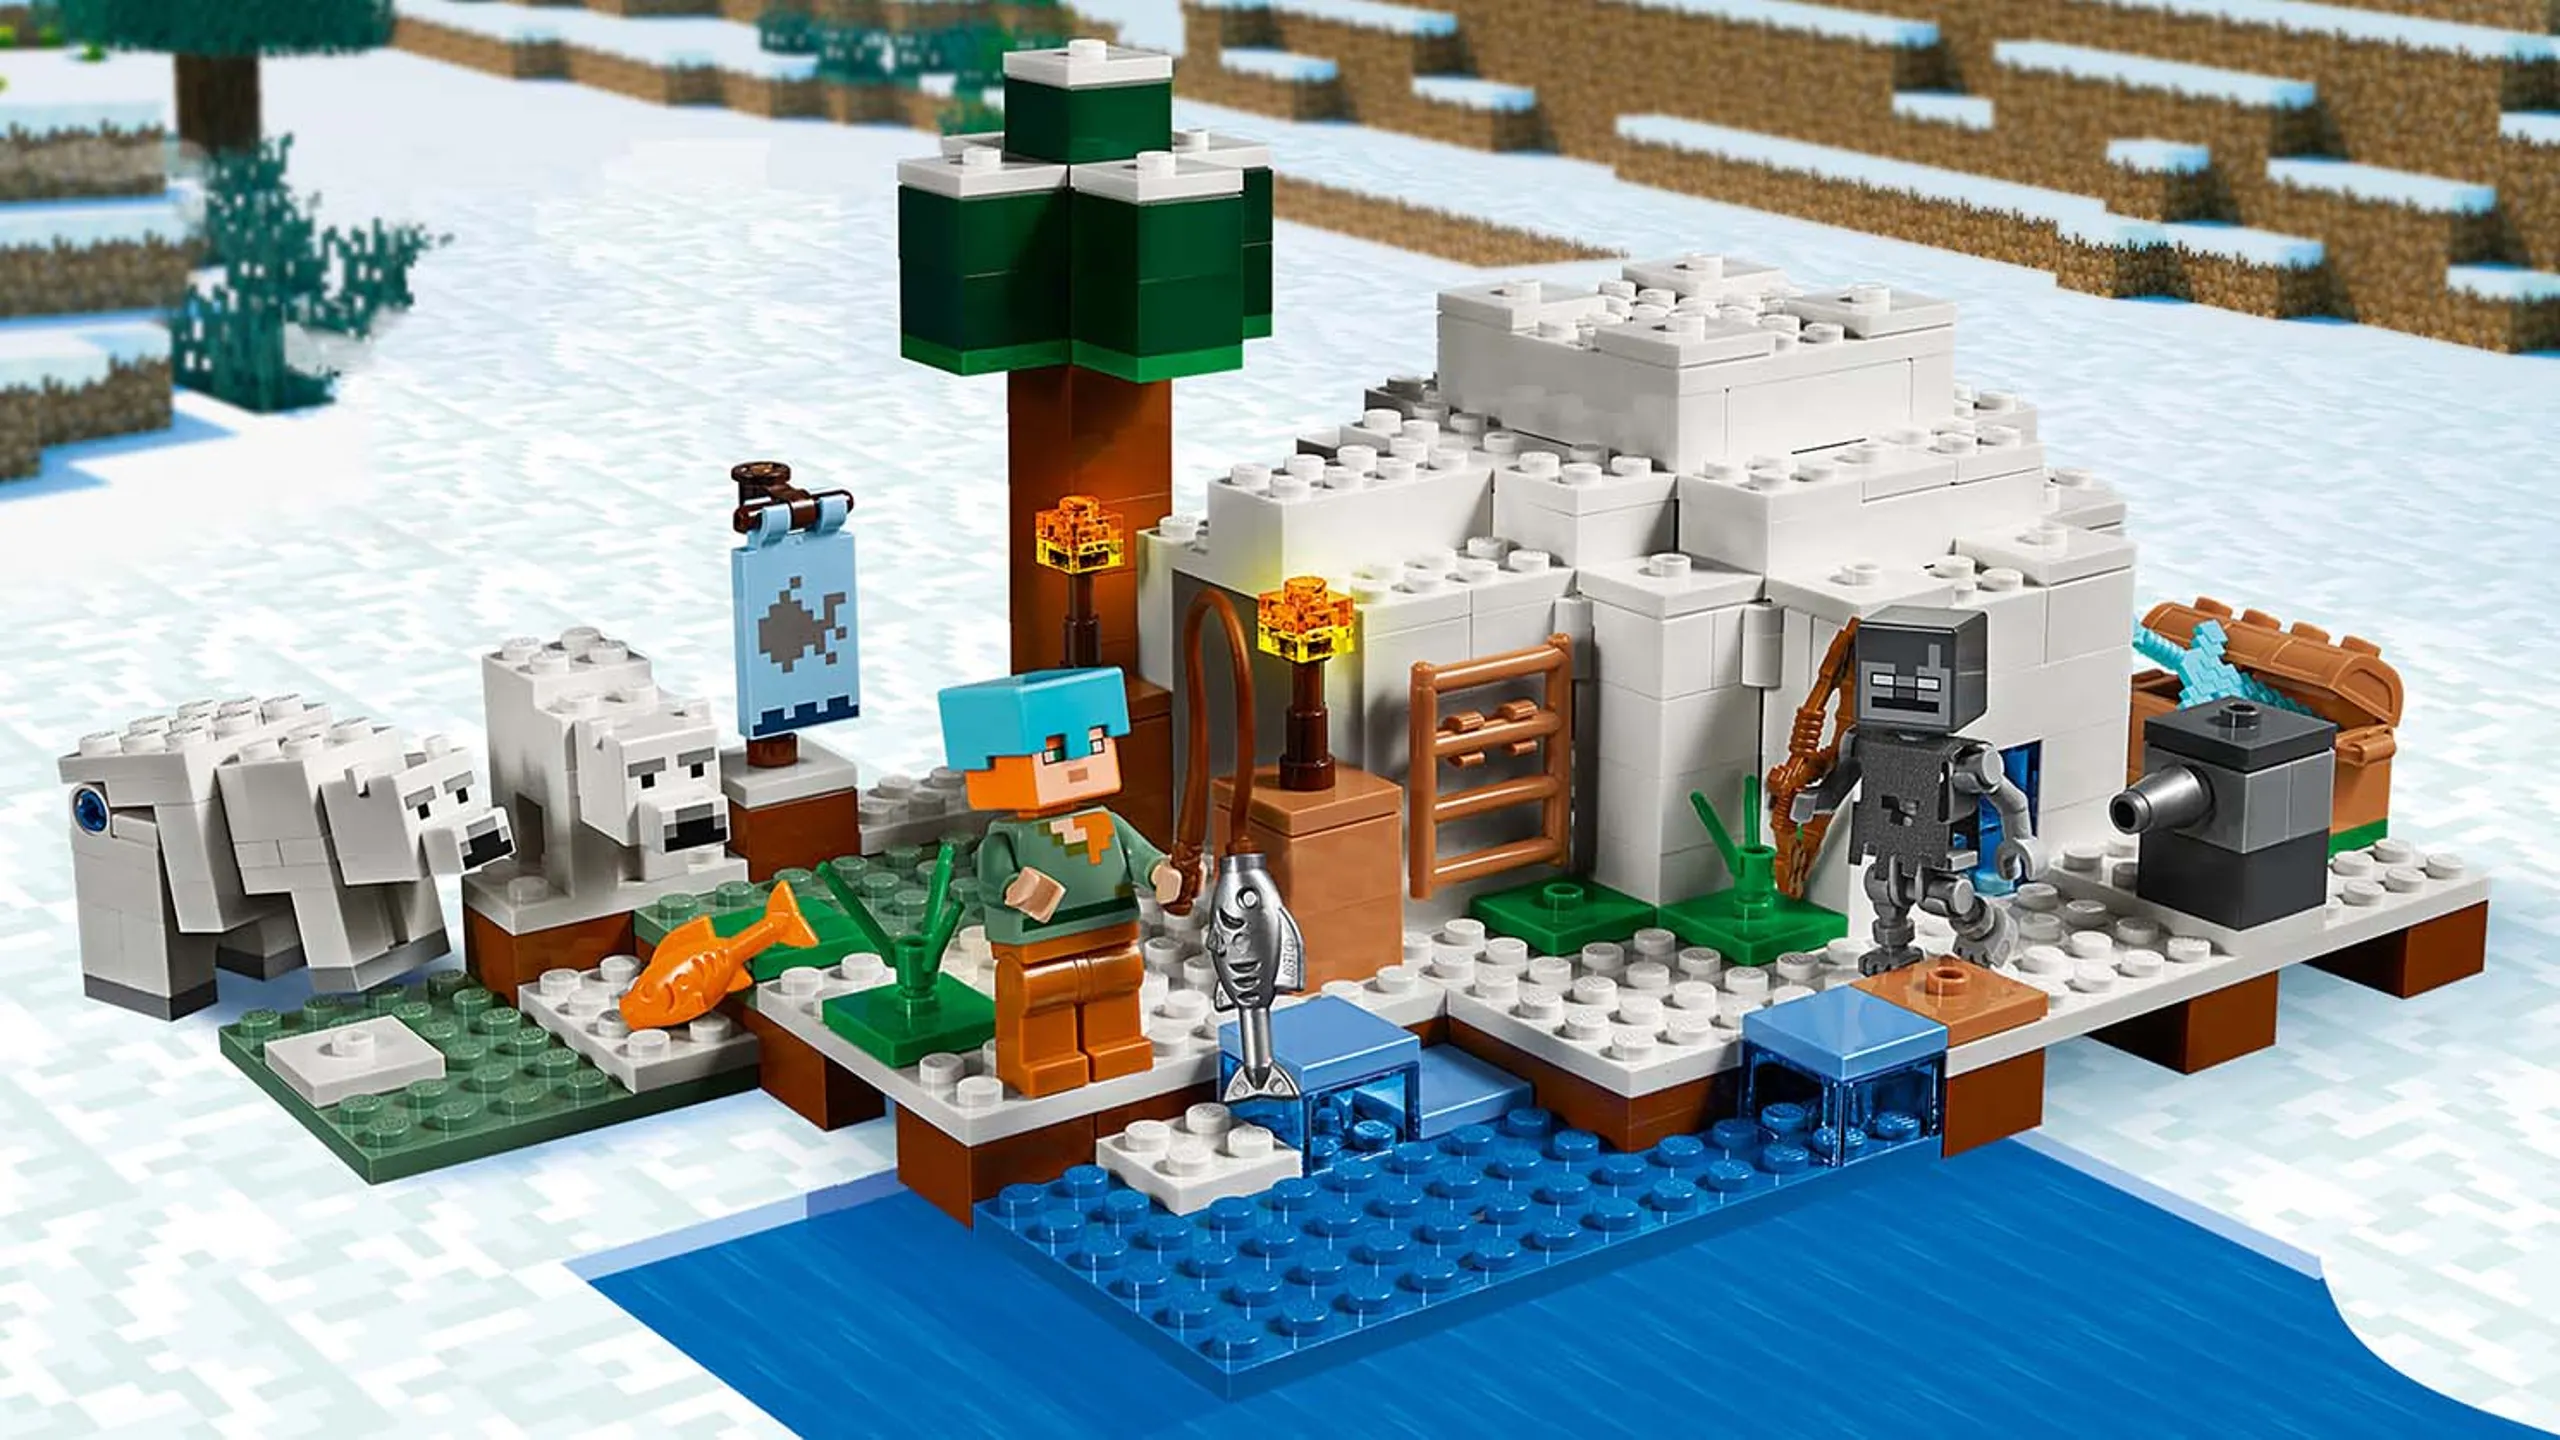 LEGO Minecraft - 21142 The Polar Igloo - Alex has discovered an igloo where a polar bear and baby polar bear are! This awesome base has a redstone torch, cozy bed, crafting table and a furnace and Alex pulls out his fishing rod to catch dinner.